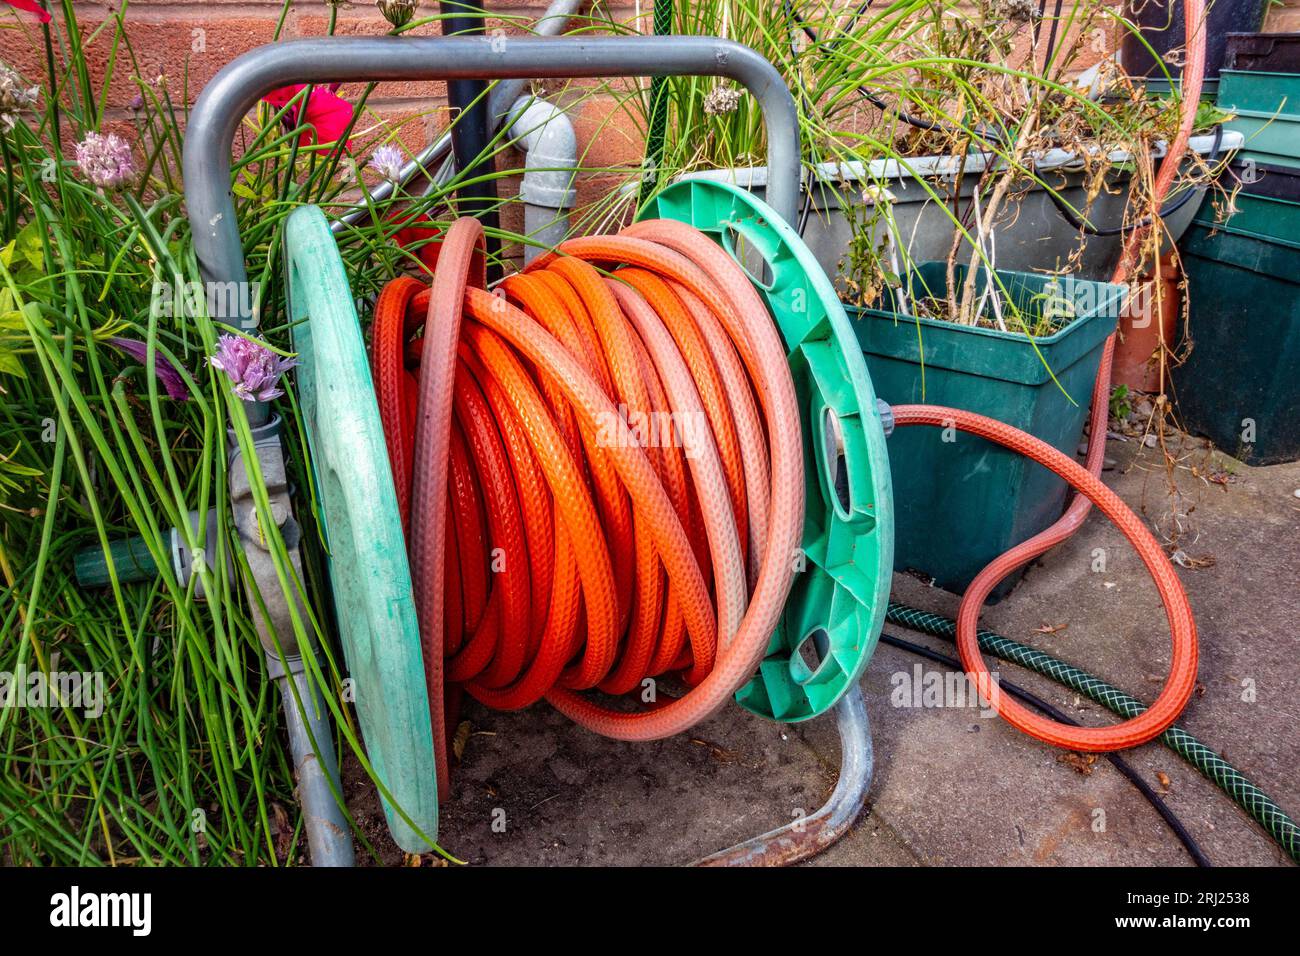 https://c8.alamy.com/comp/2RJ2538/an-old-weathered-looking-hose-pipe-on-a-reel-on-the-ground-in-front-of-a-wall-in-a-back-garden-2RJ2538.jpg